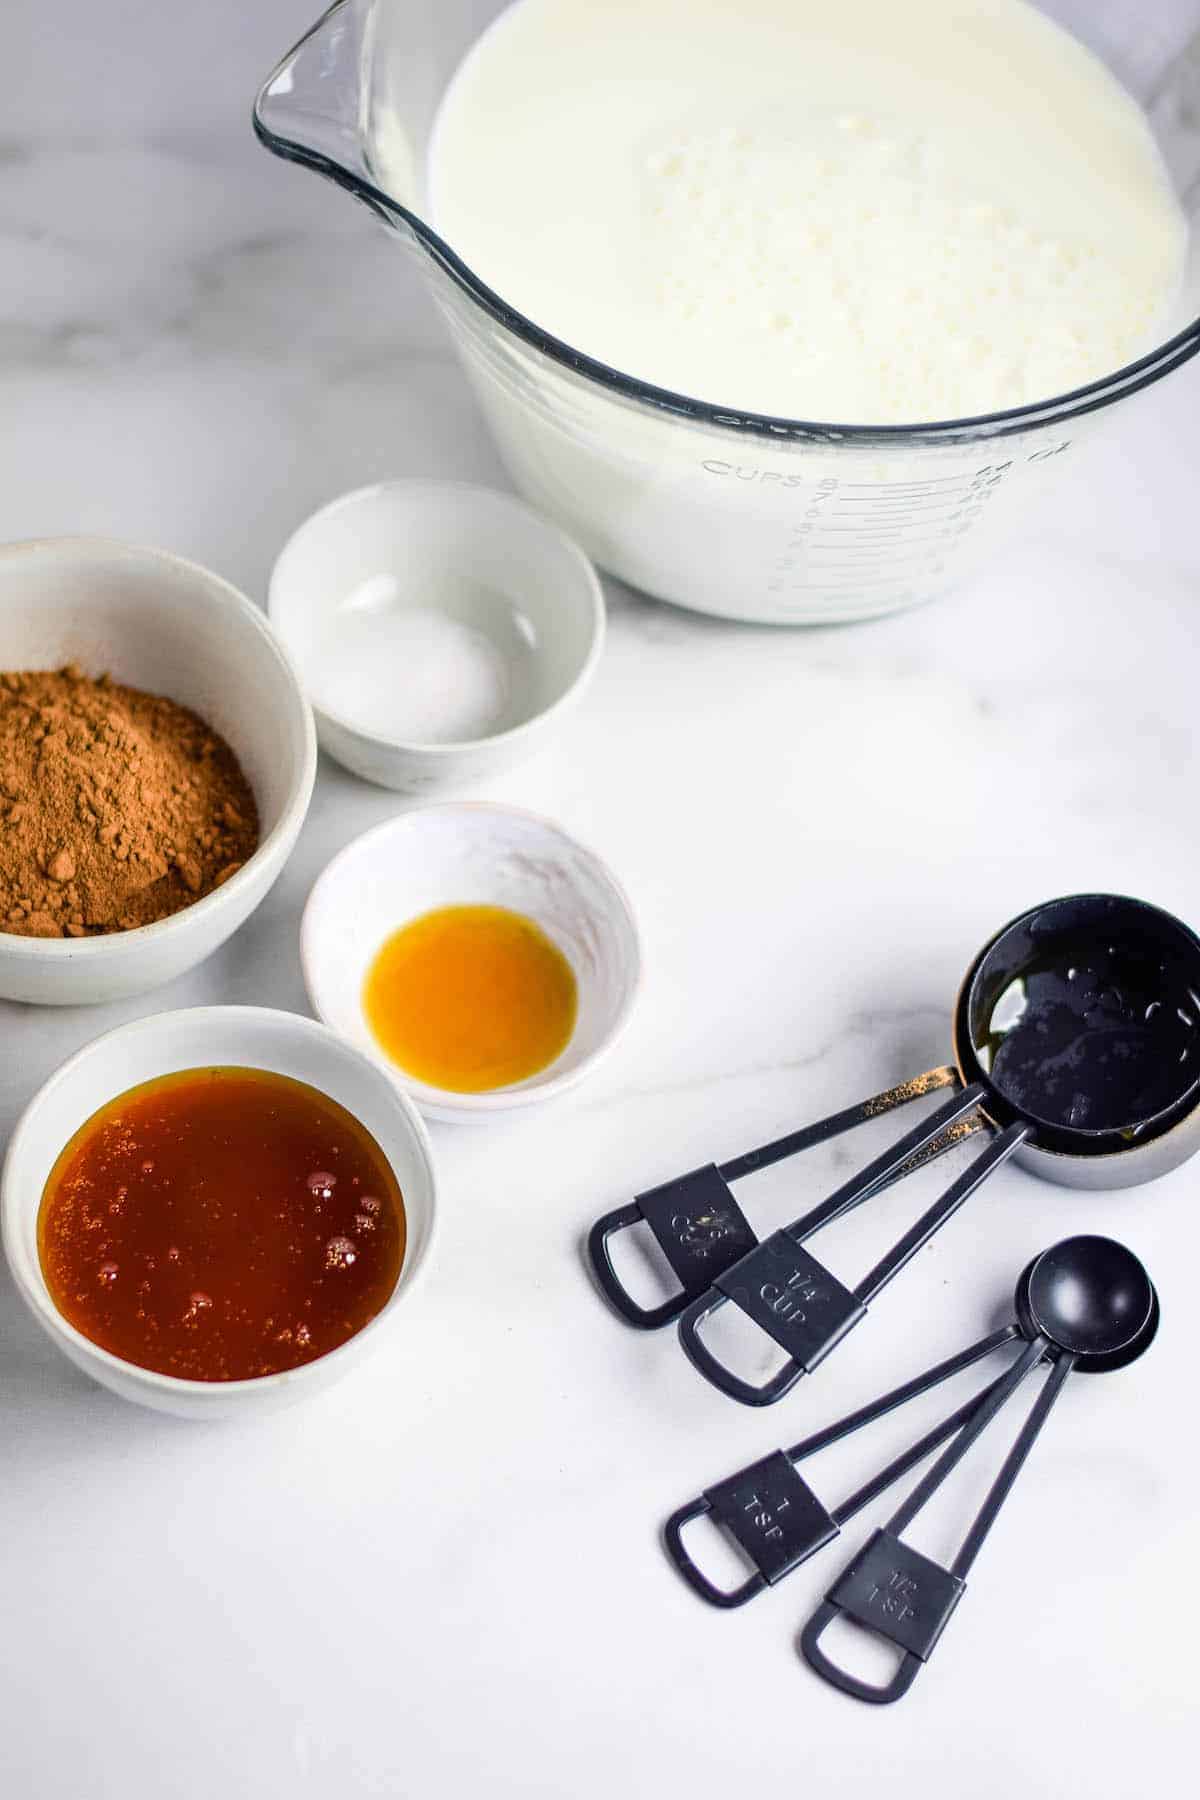 ingredients in small bowls and measuring cups 